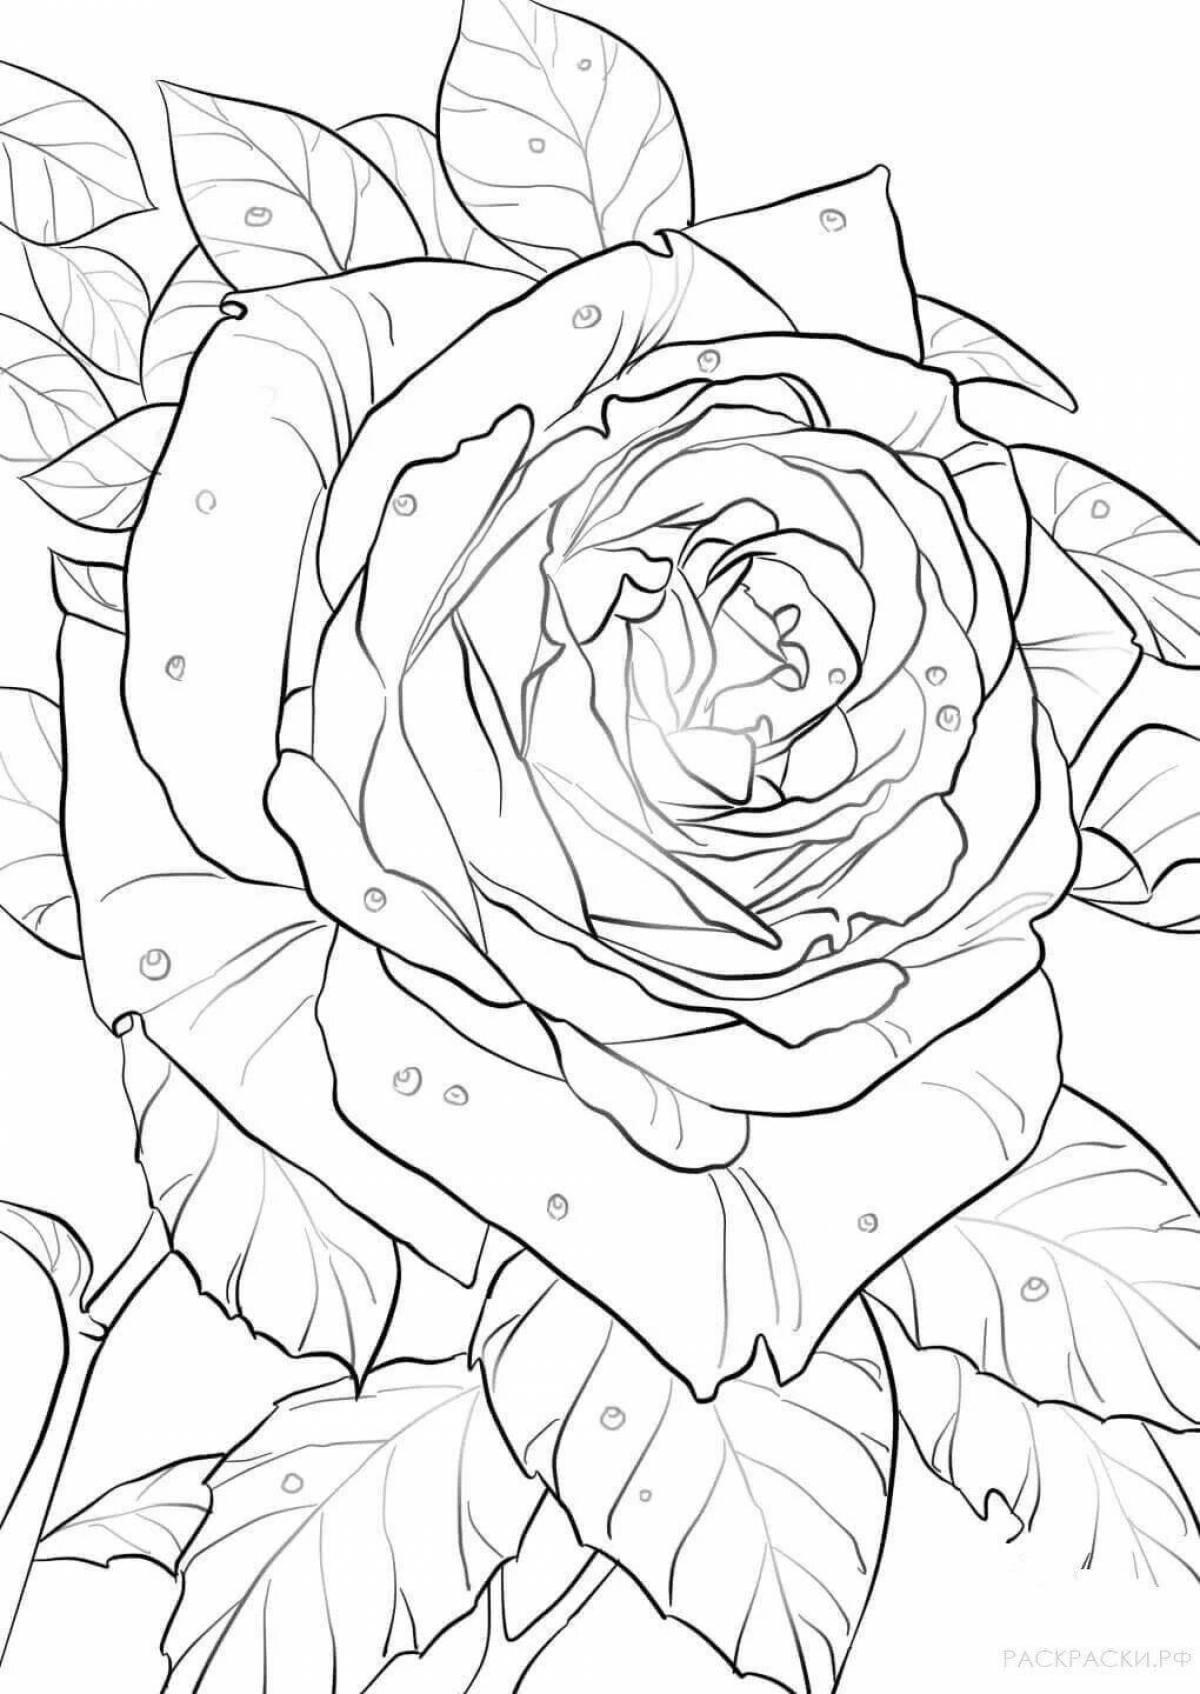 Amazing roses for coloring